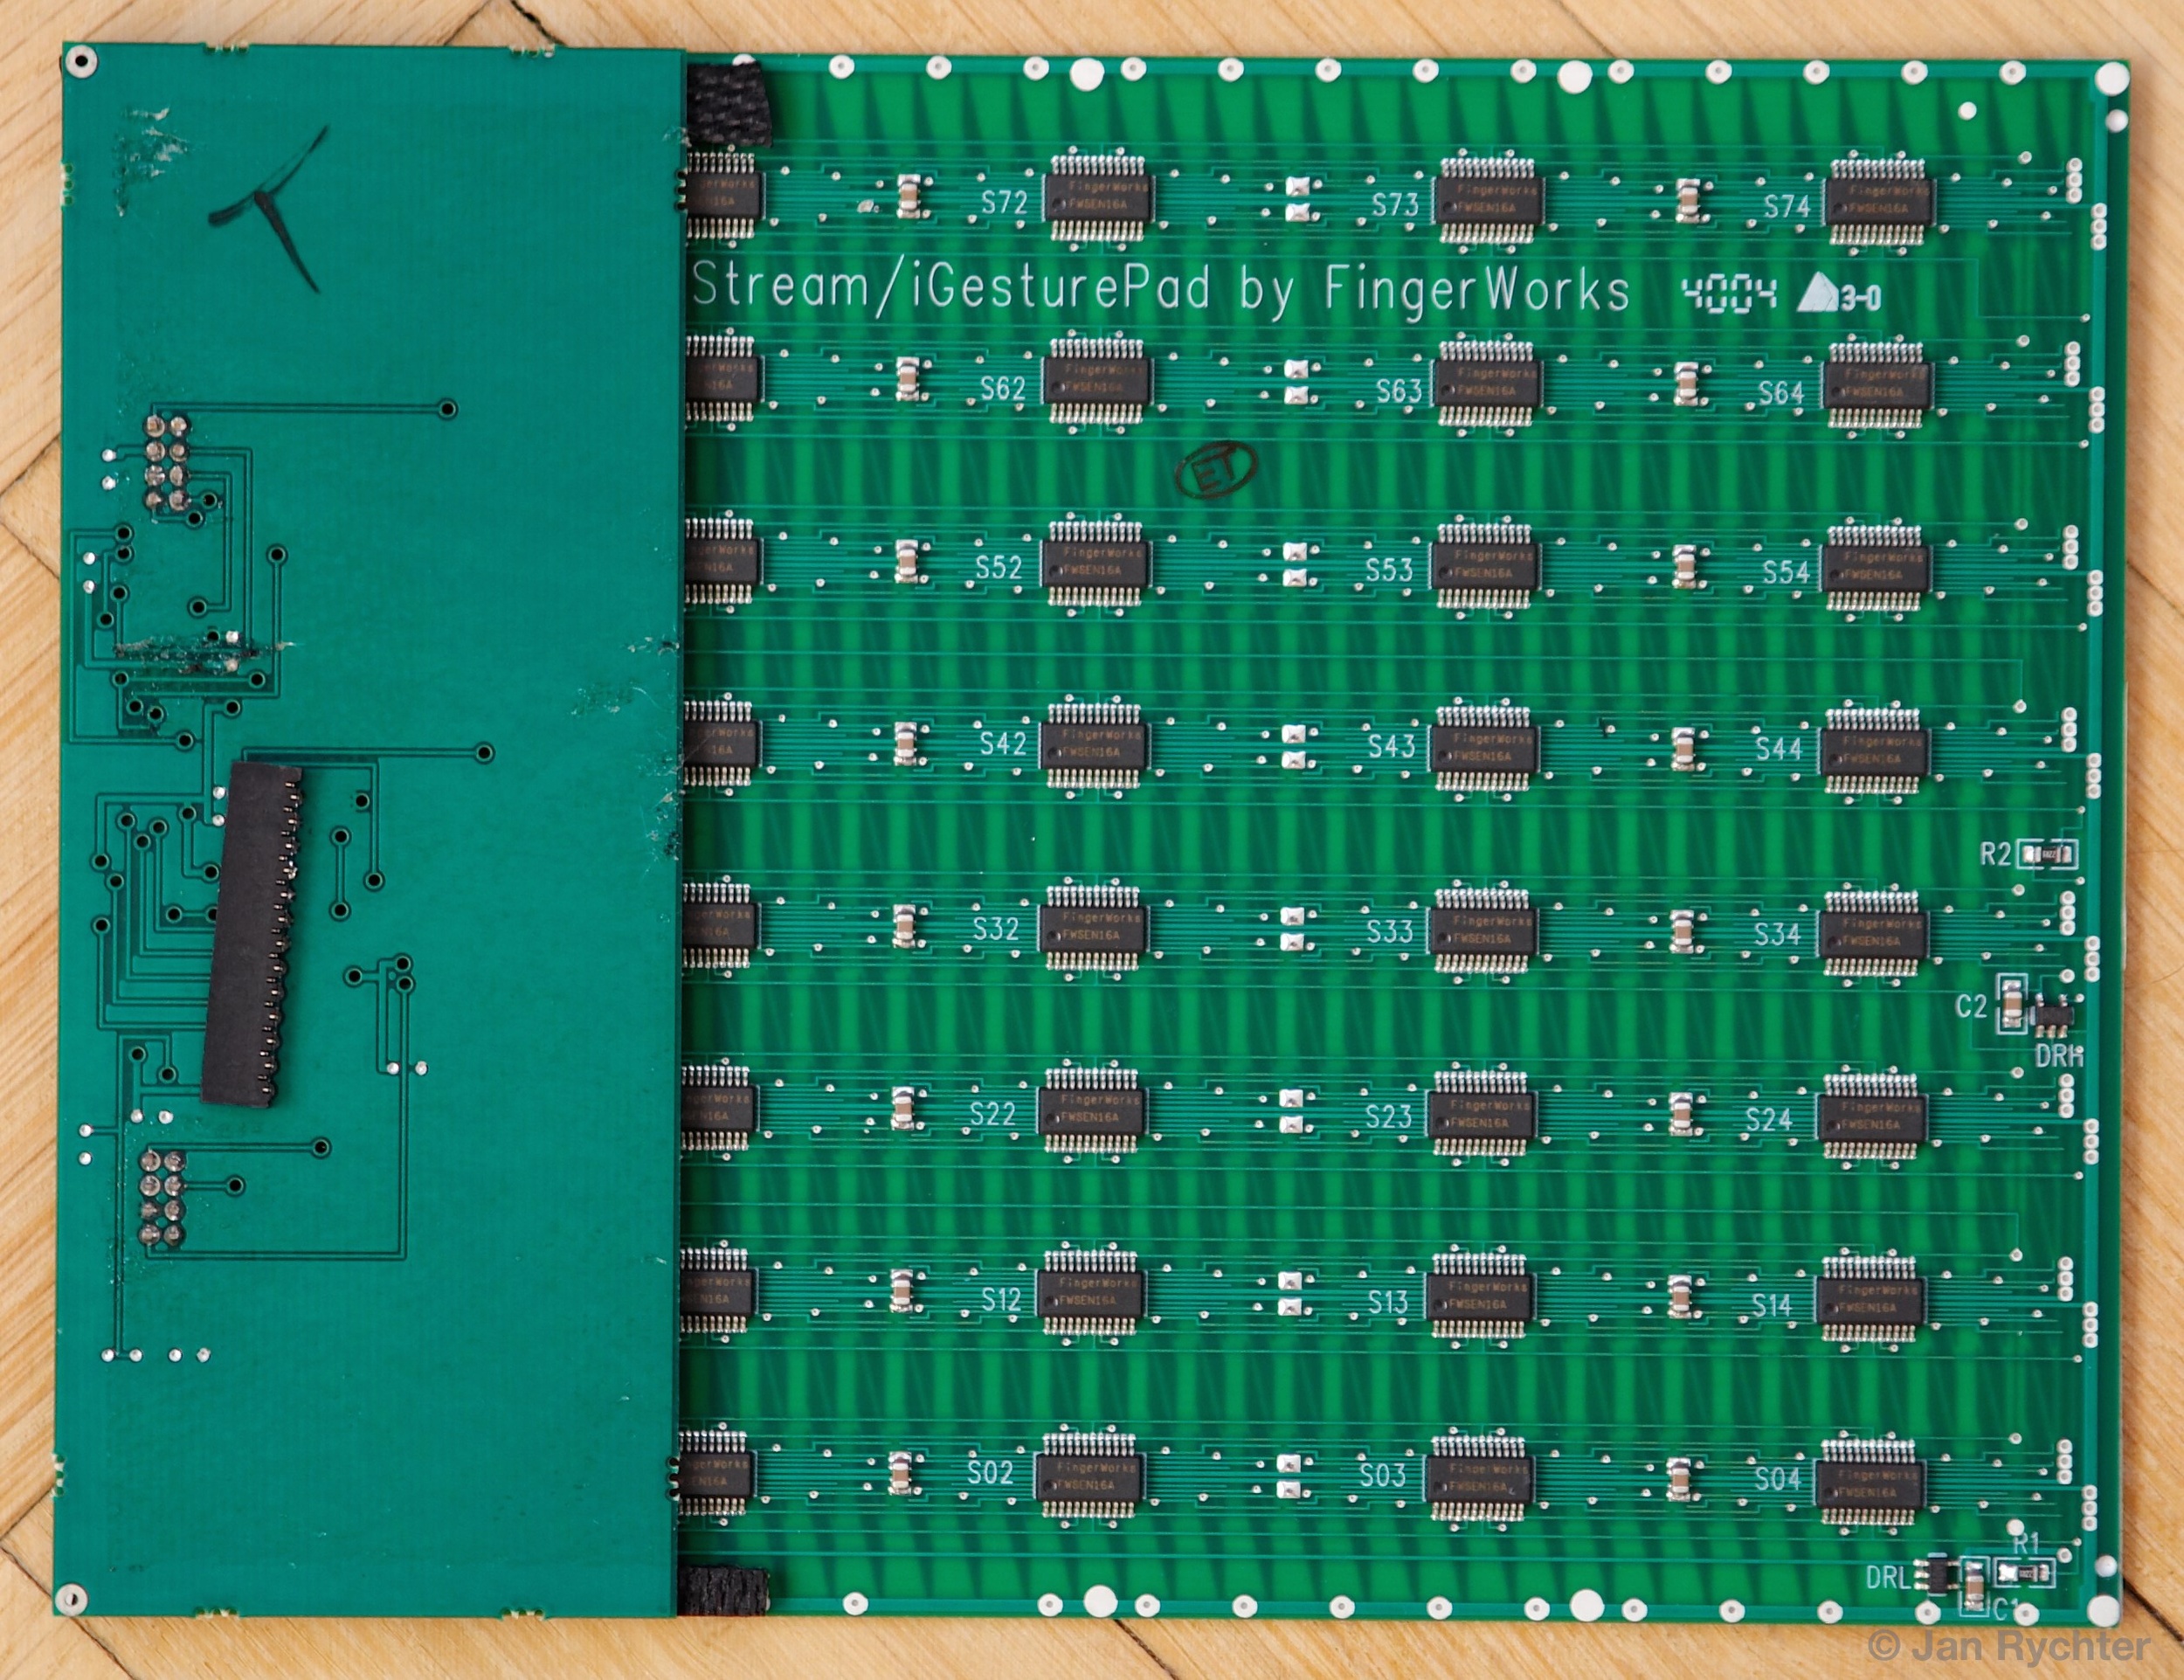 Inside one of the halves. You can see the FWSEN16A chips.